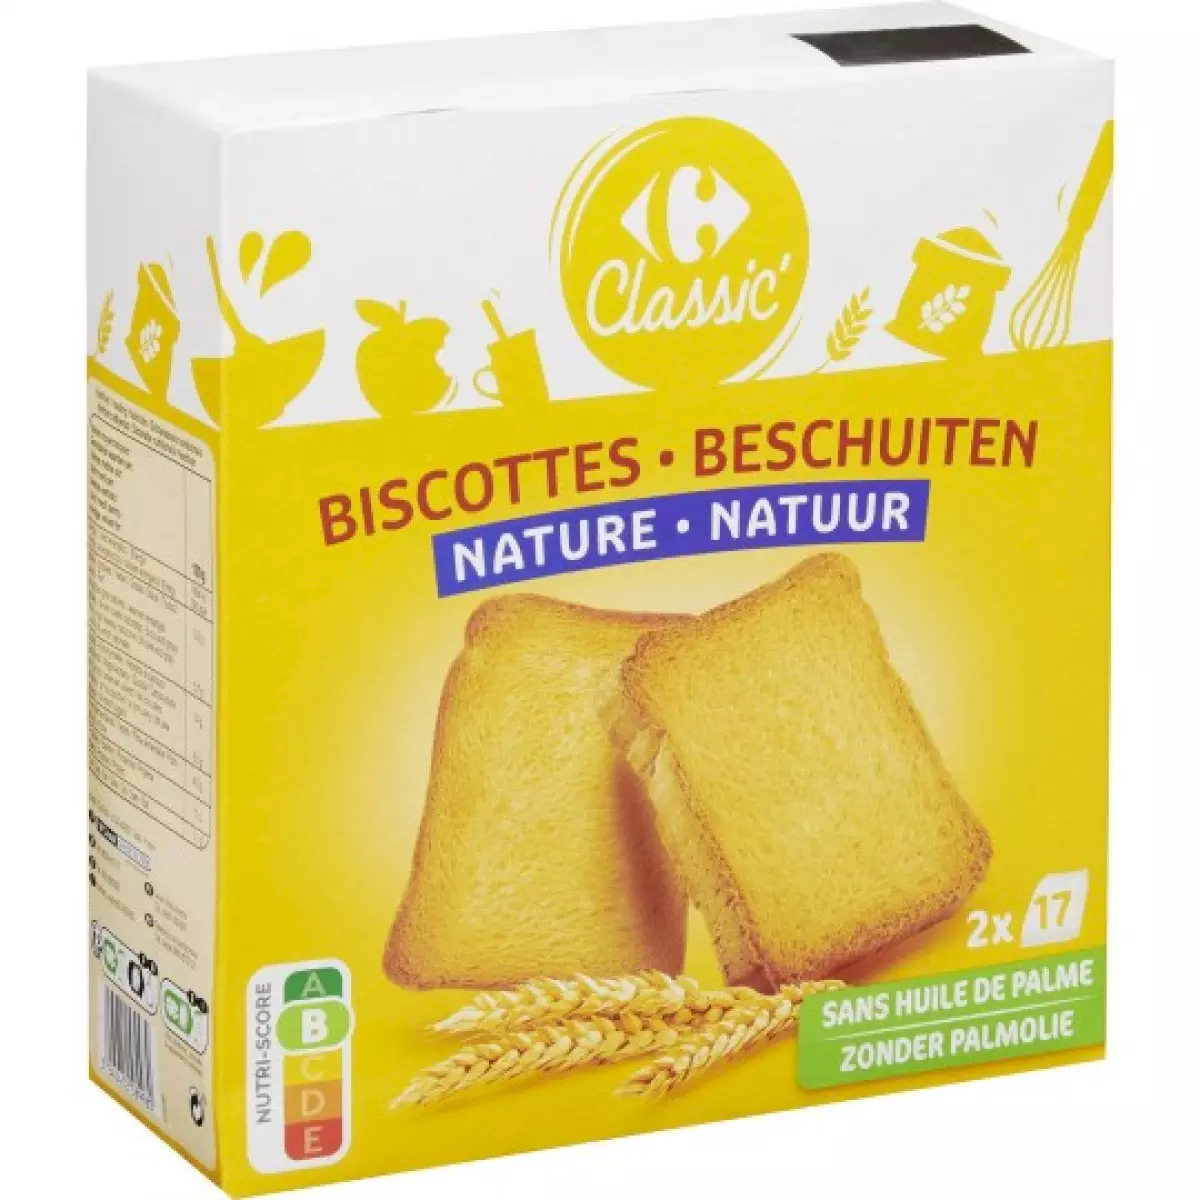 BISCOTTES 34 TR PQ 300 GR CARREFOUR